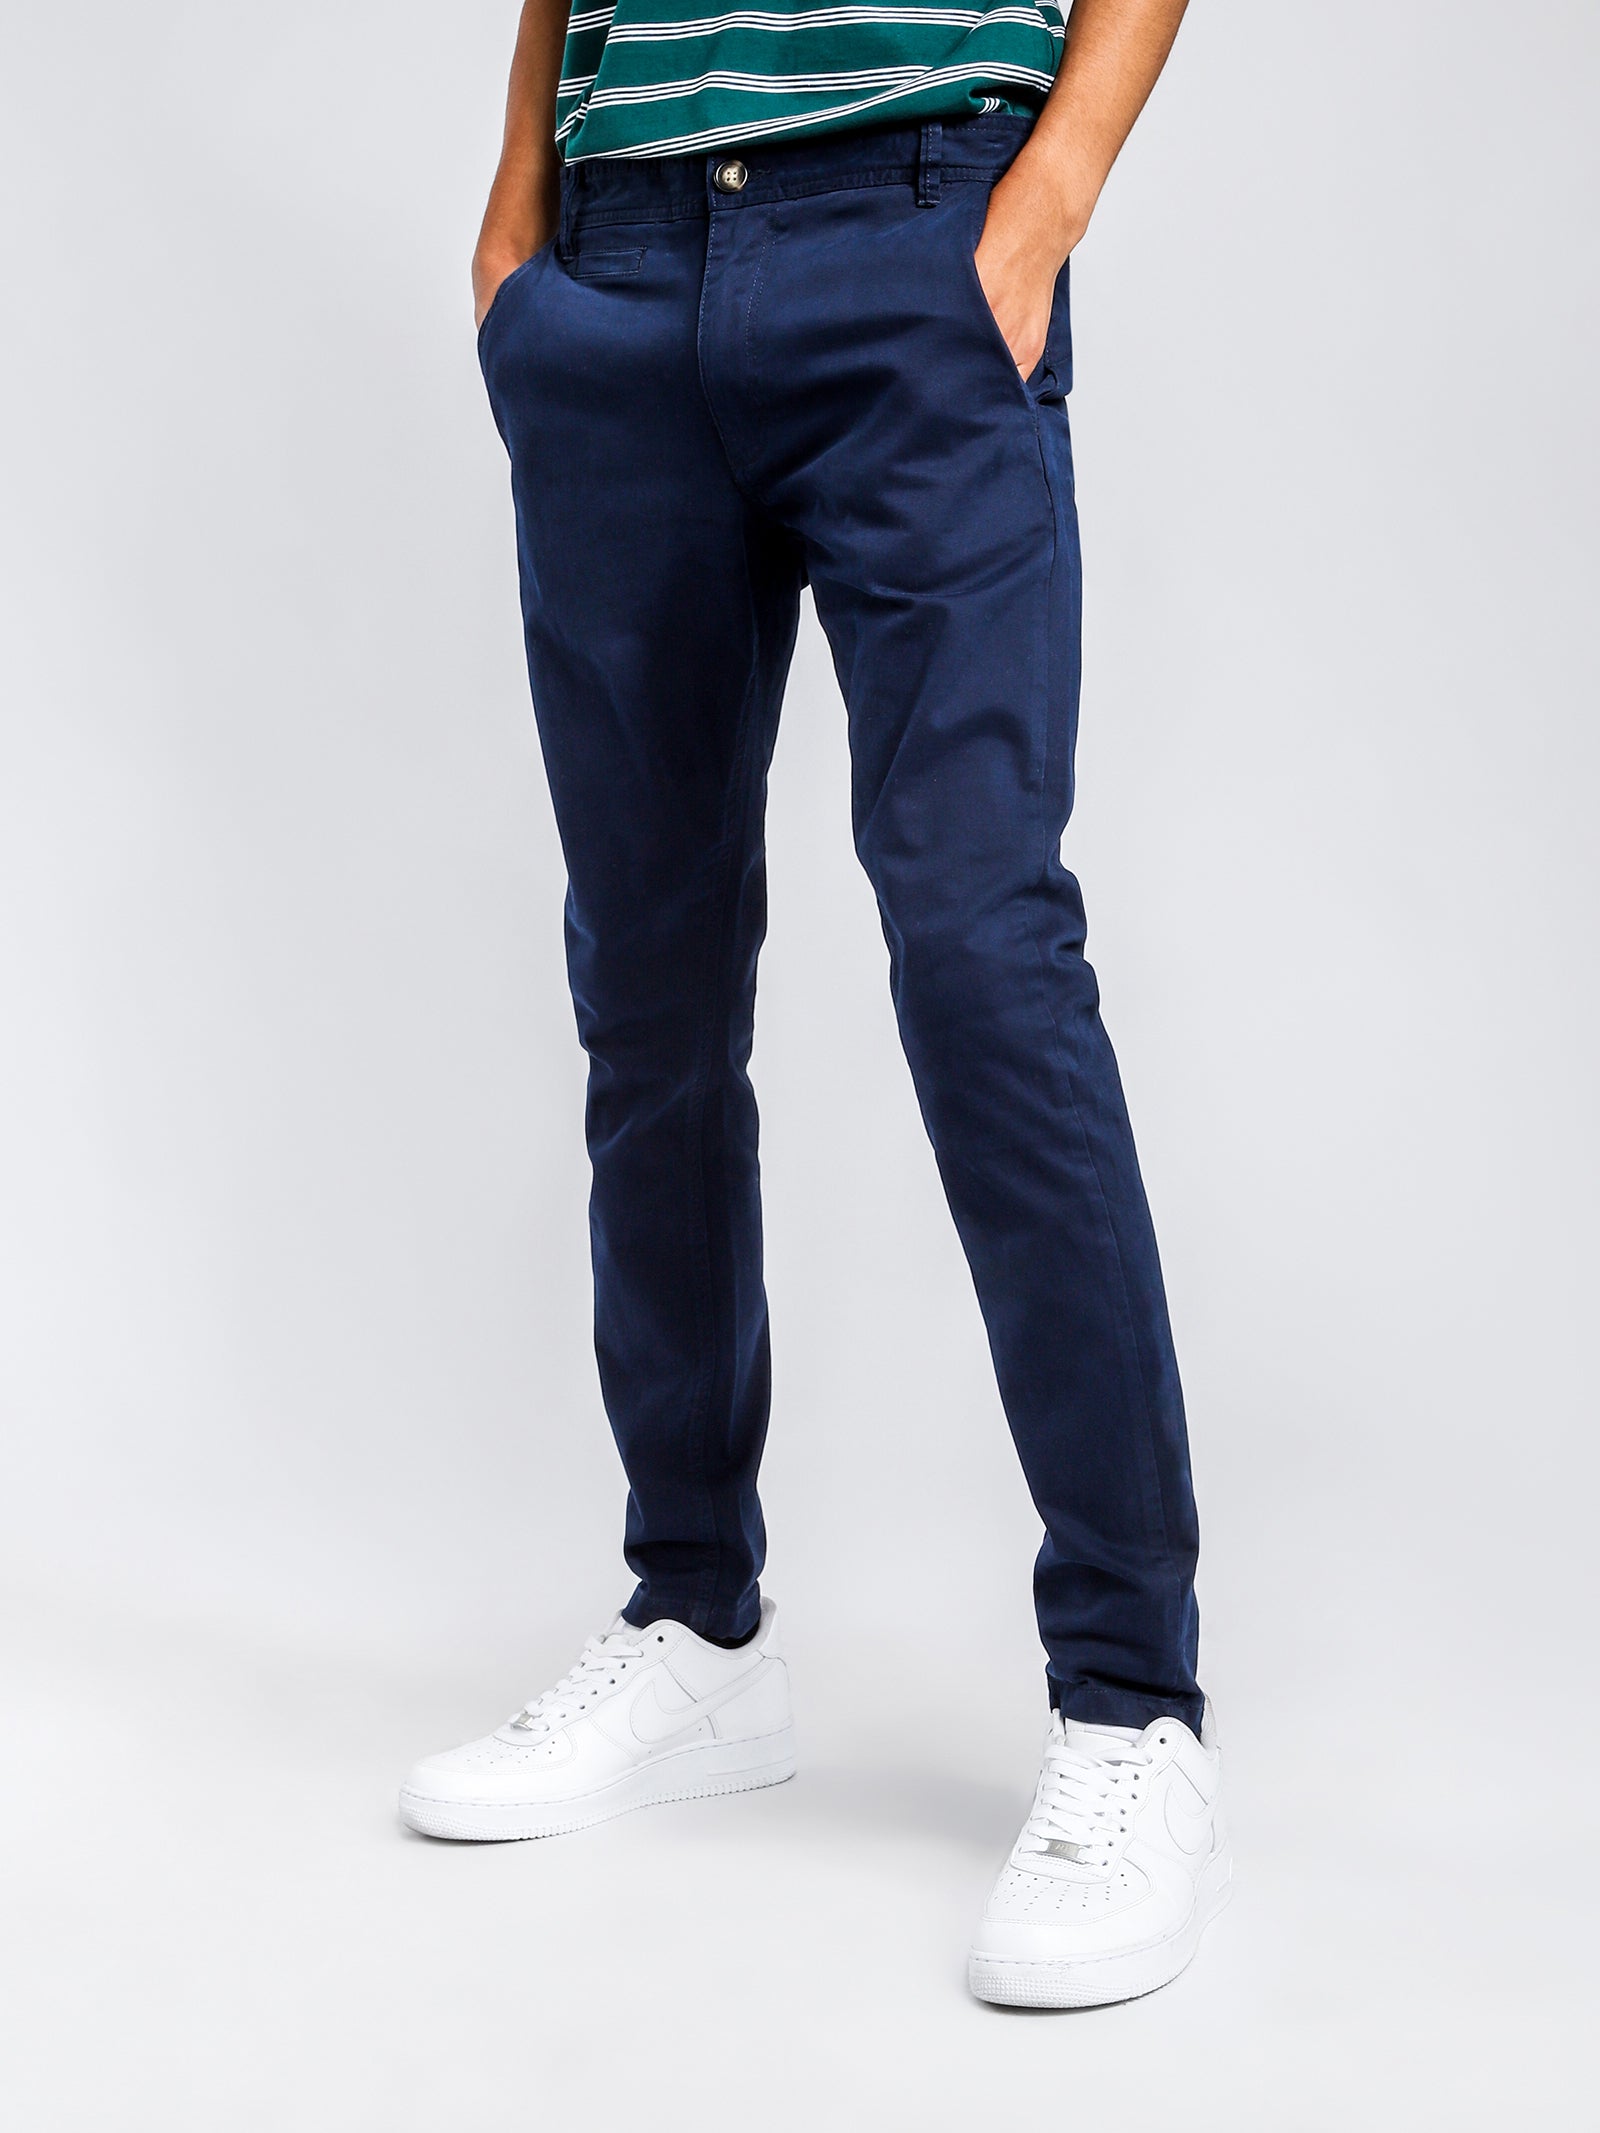 jogger type jeans